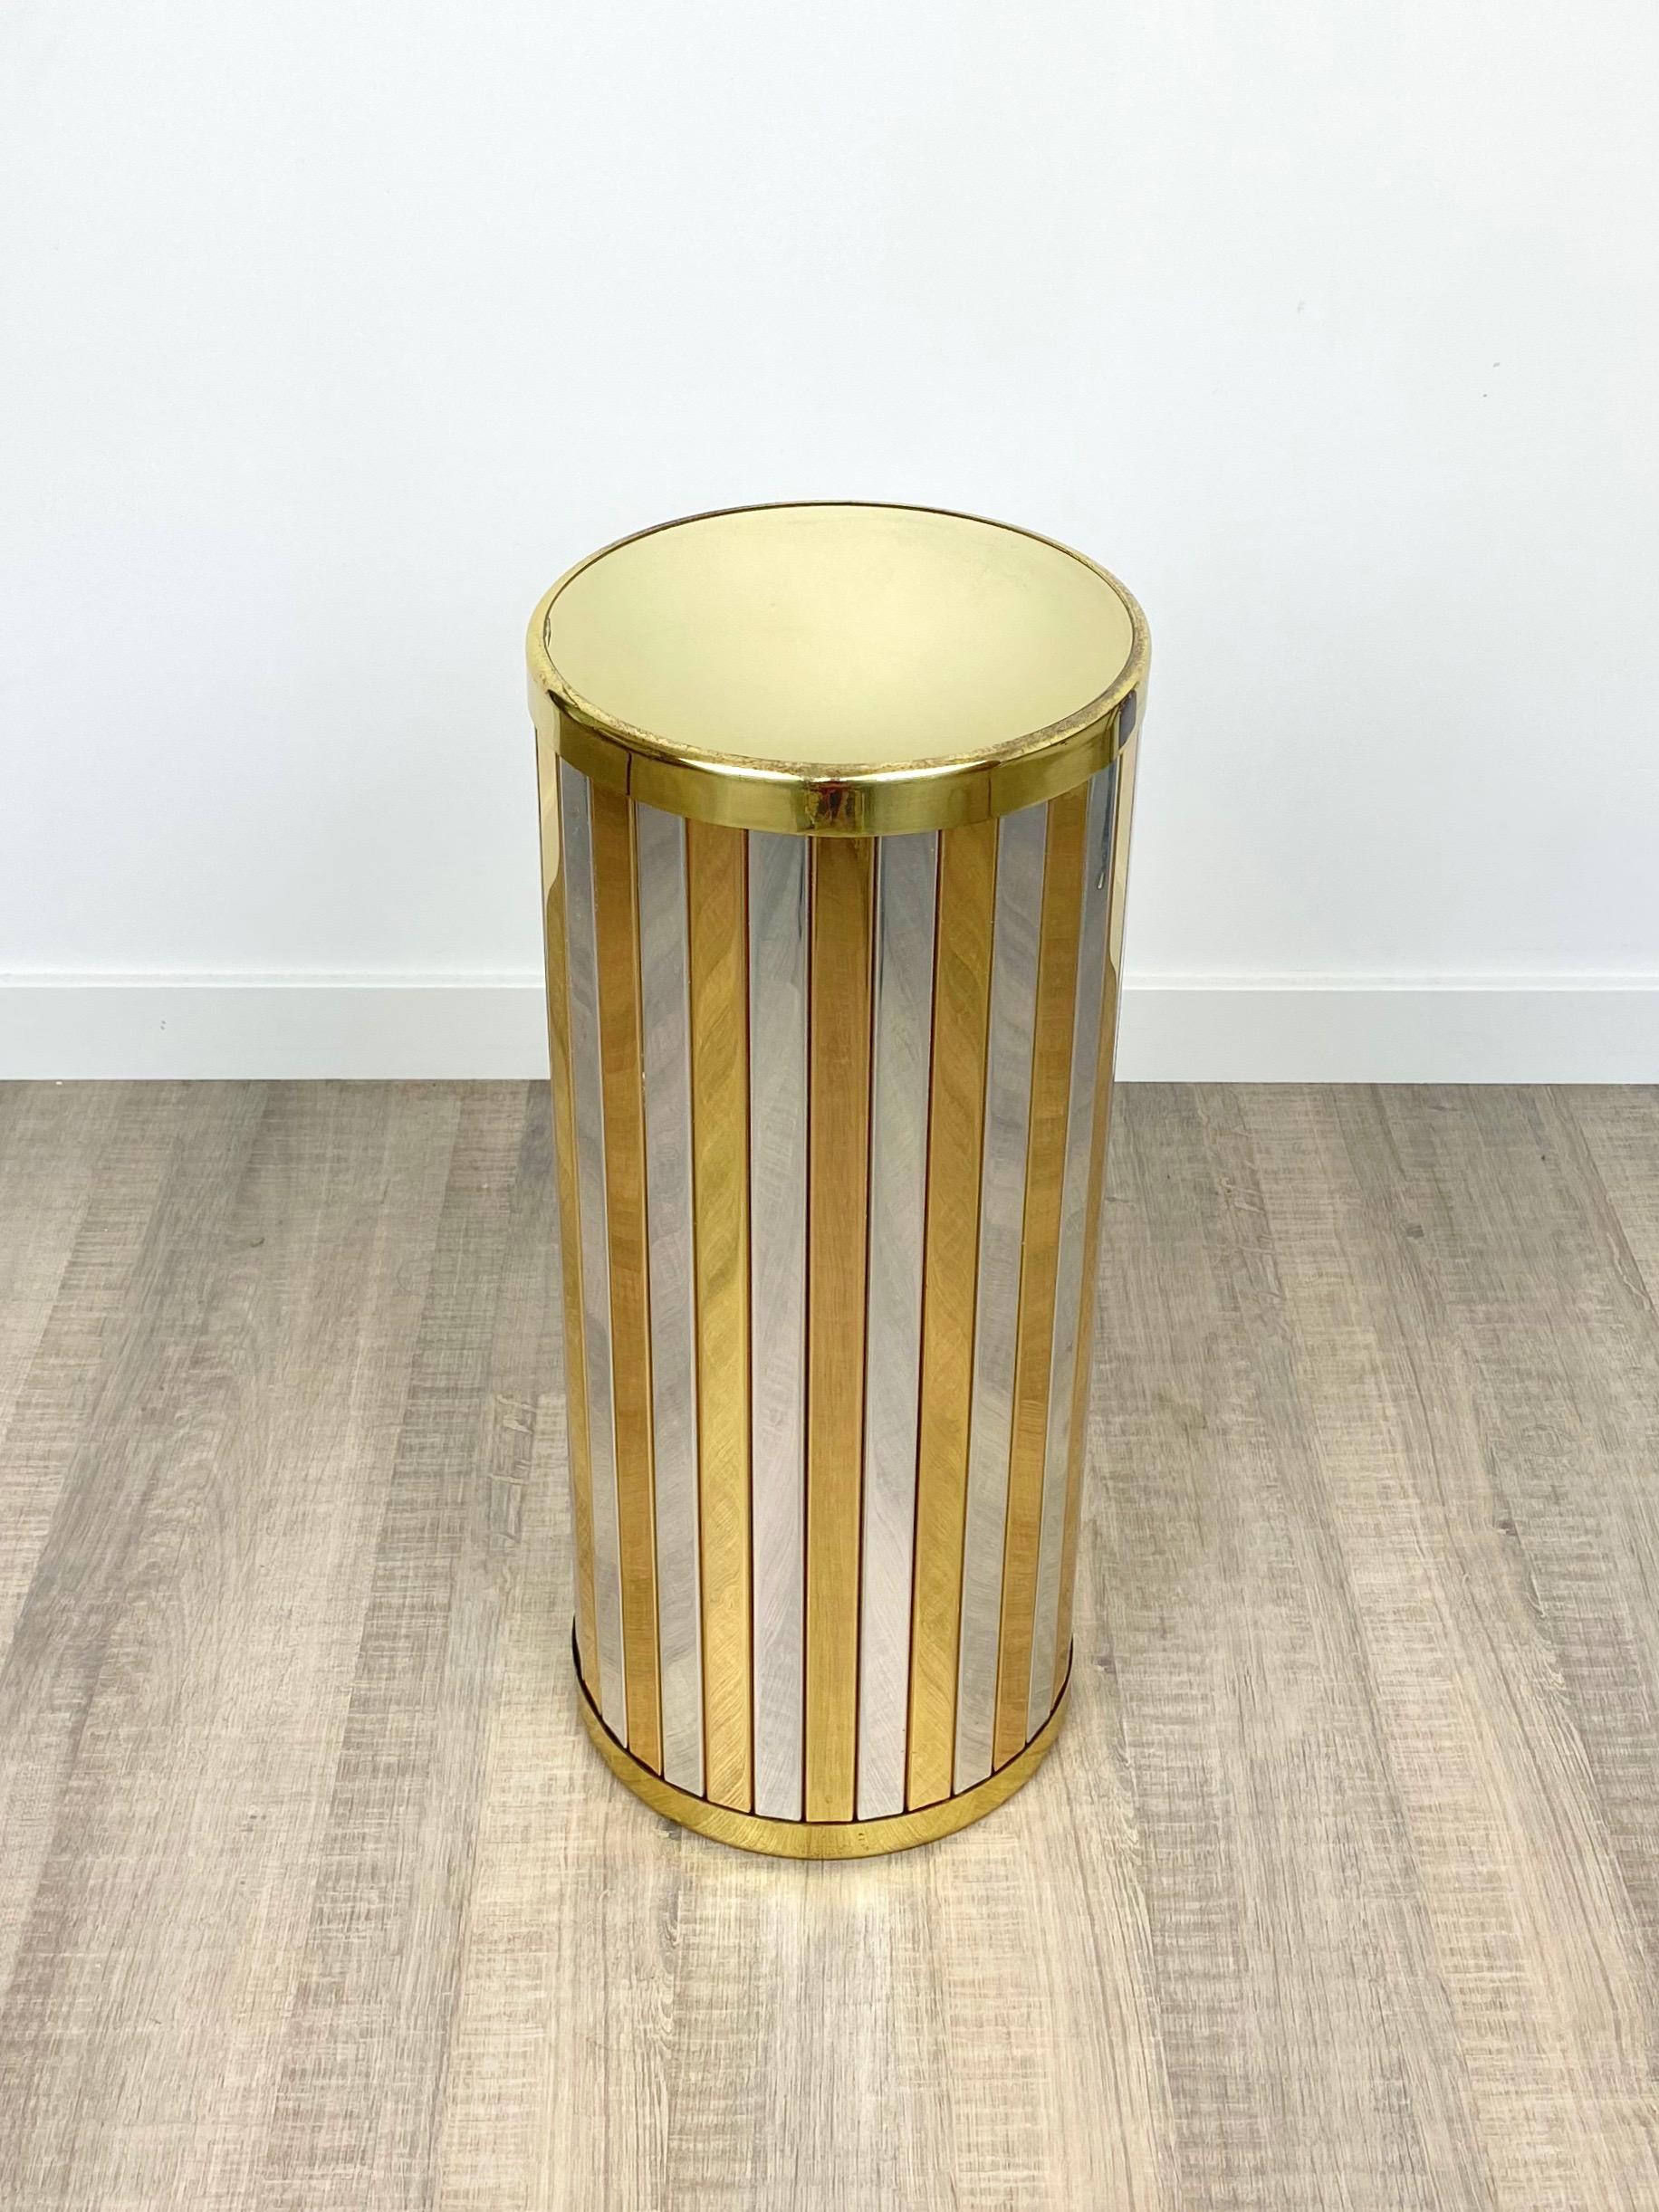 Hollywood Regency Umbrella Stand in Brass and Chrome Romeo Rega Style, Italy, 1970s